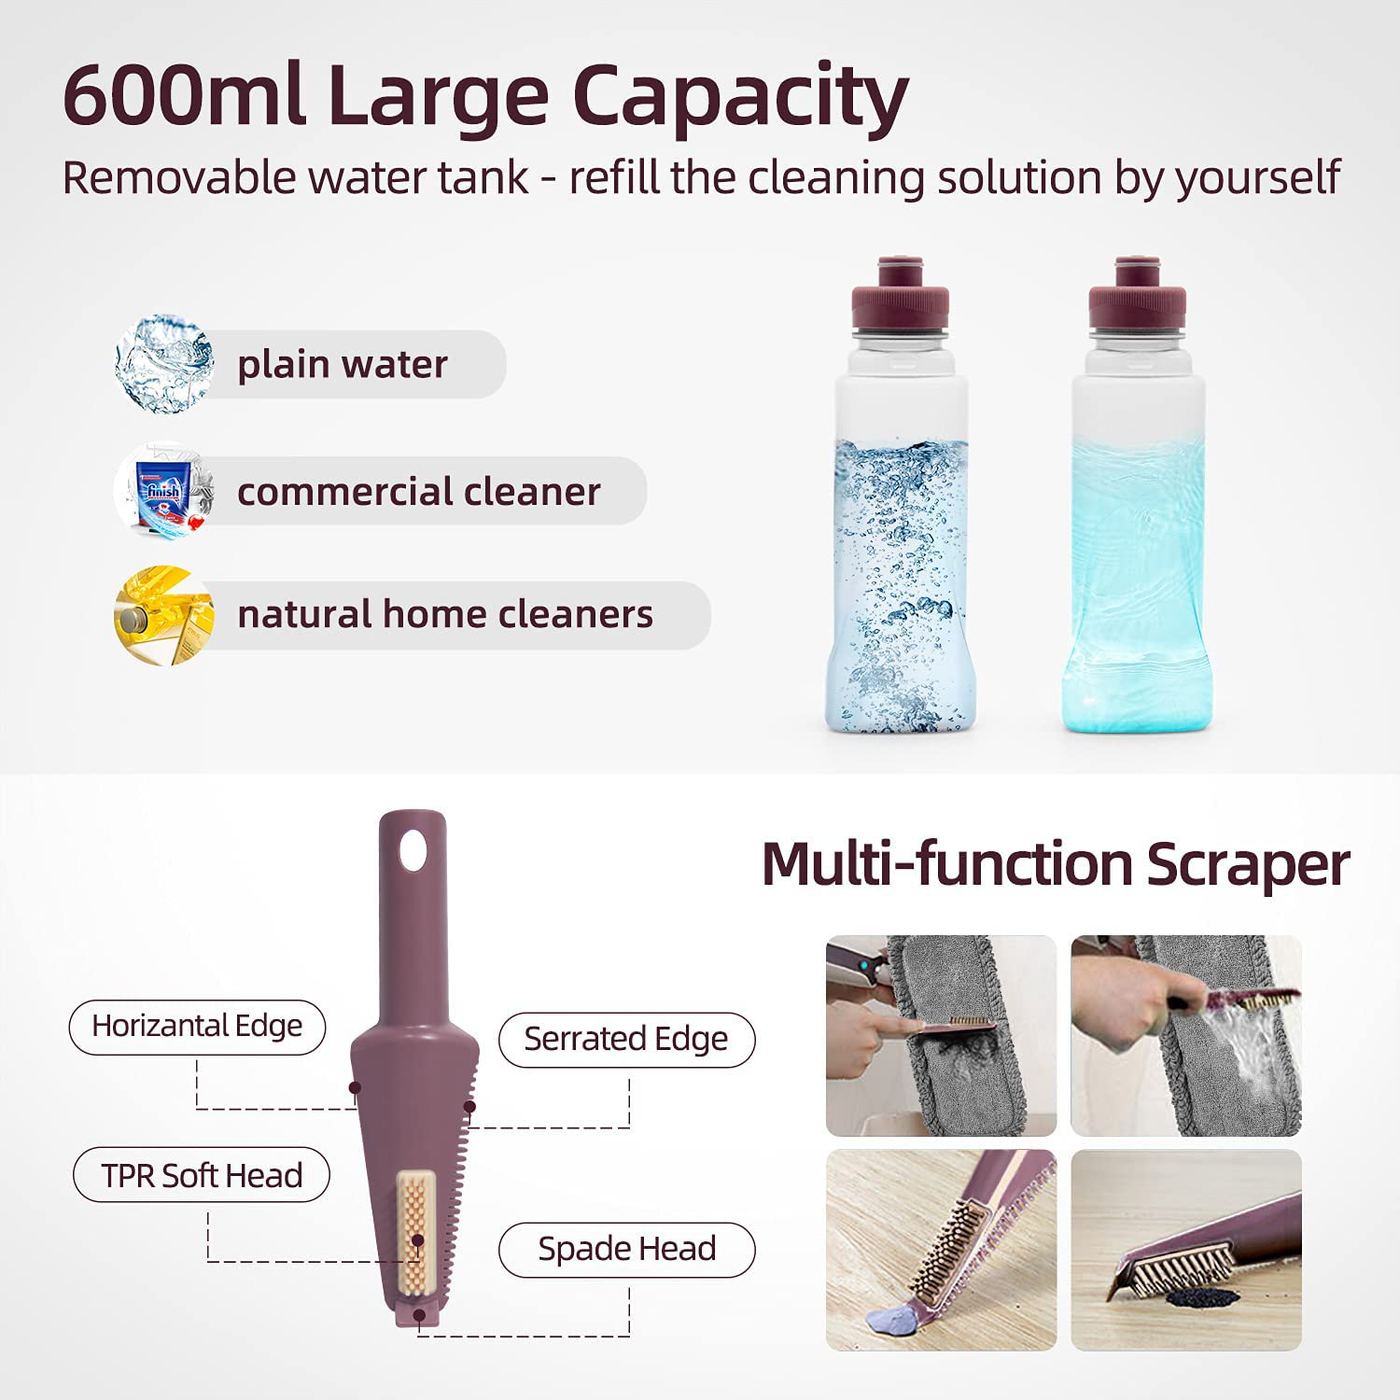 Mops for Floor Cleaning, BICZZYIY Spray Floor Mop Cleaner with 2 x 600ml Refillable Bottles, 3 pcs Washable Pads, 1 Scraper, 360° Spin Microfiber Dry Wet Mop for Hardwood Hard Floors Kitchen Home Car